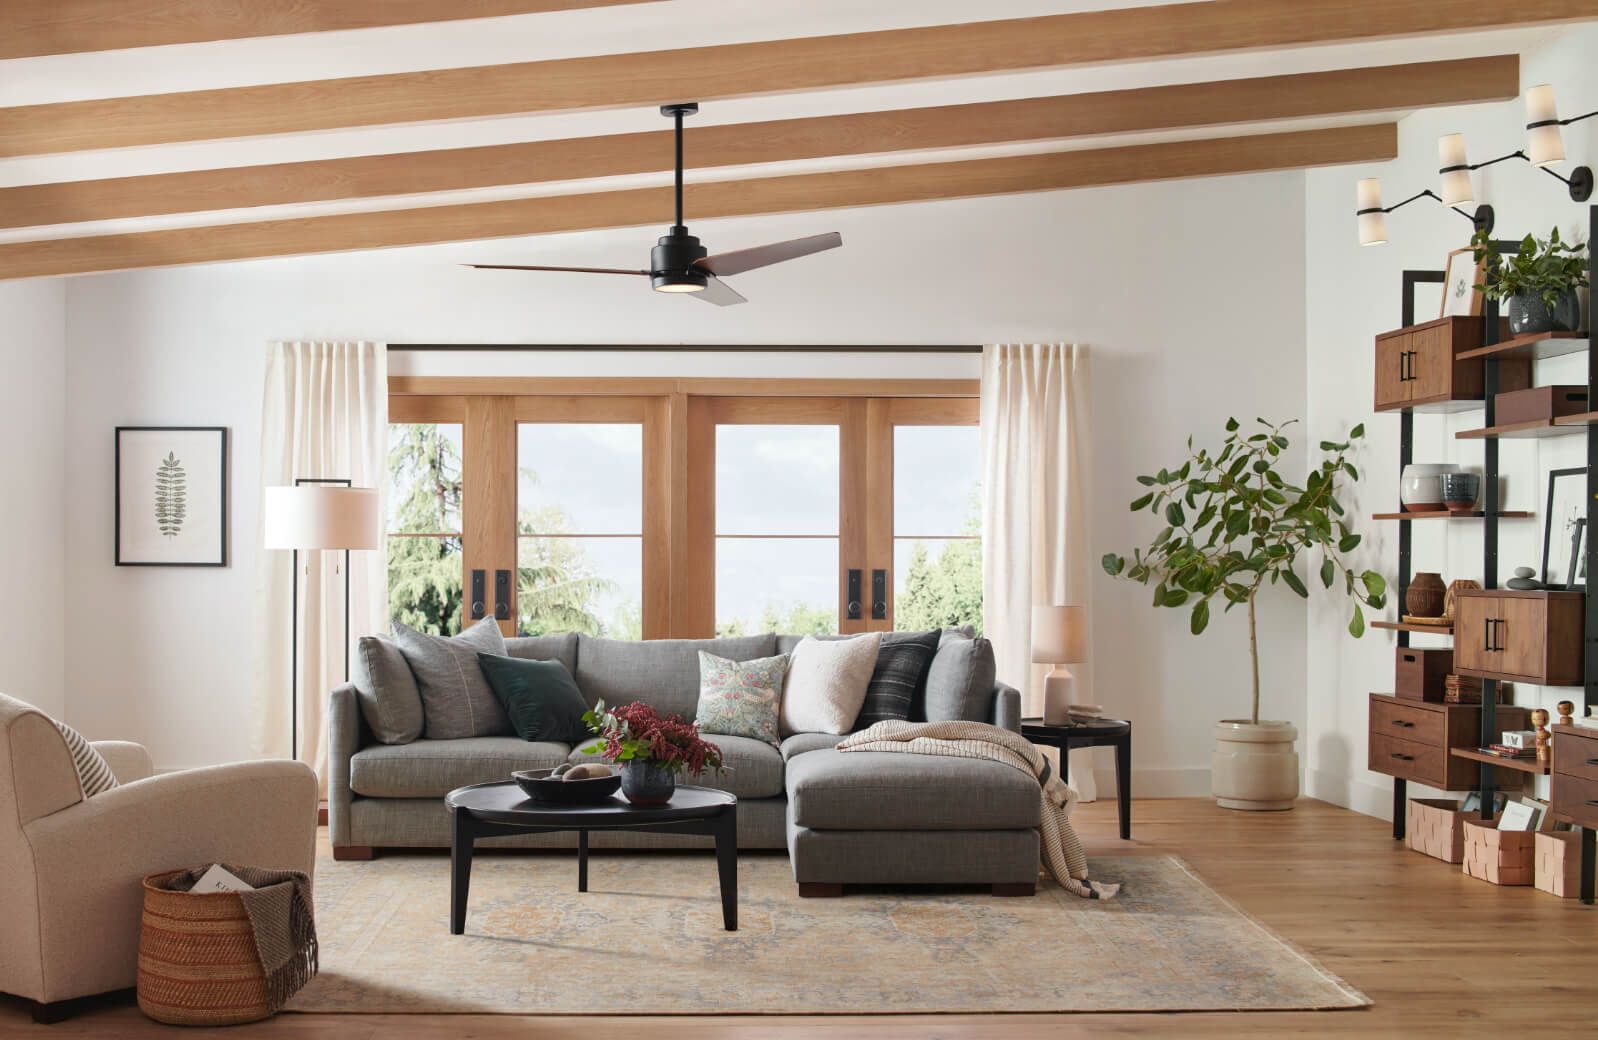 How To Choose The Right Ceiling Fan